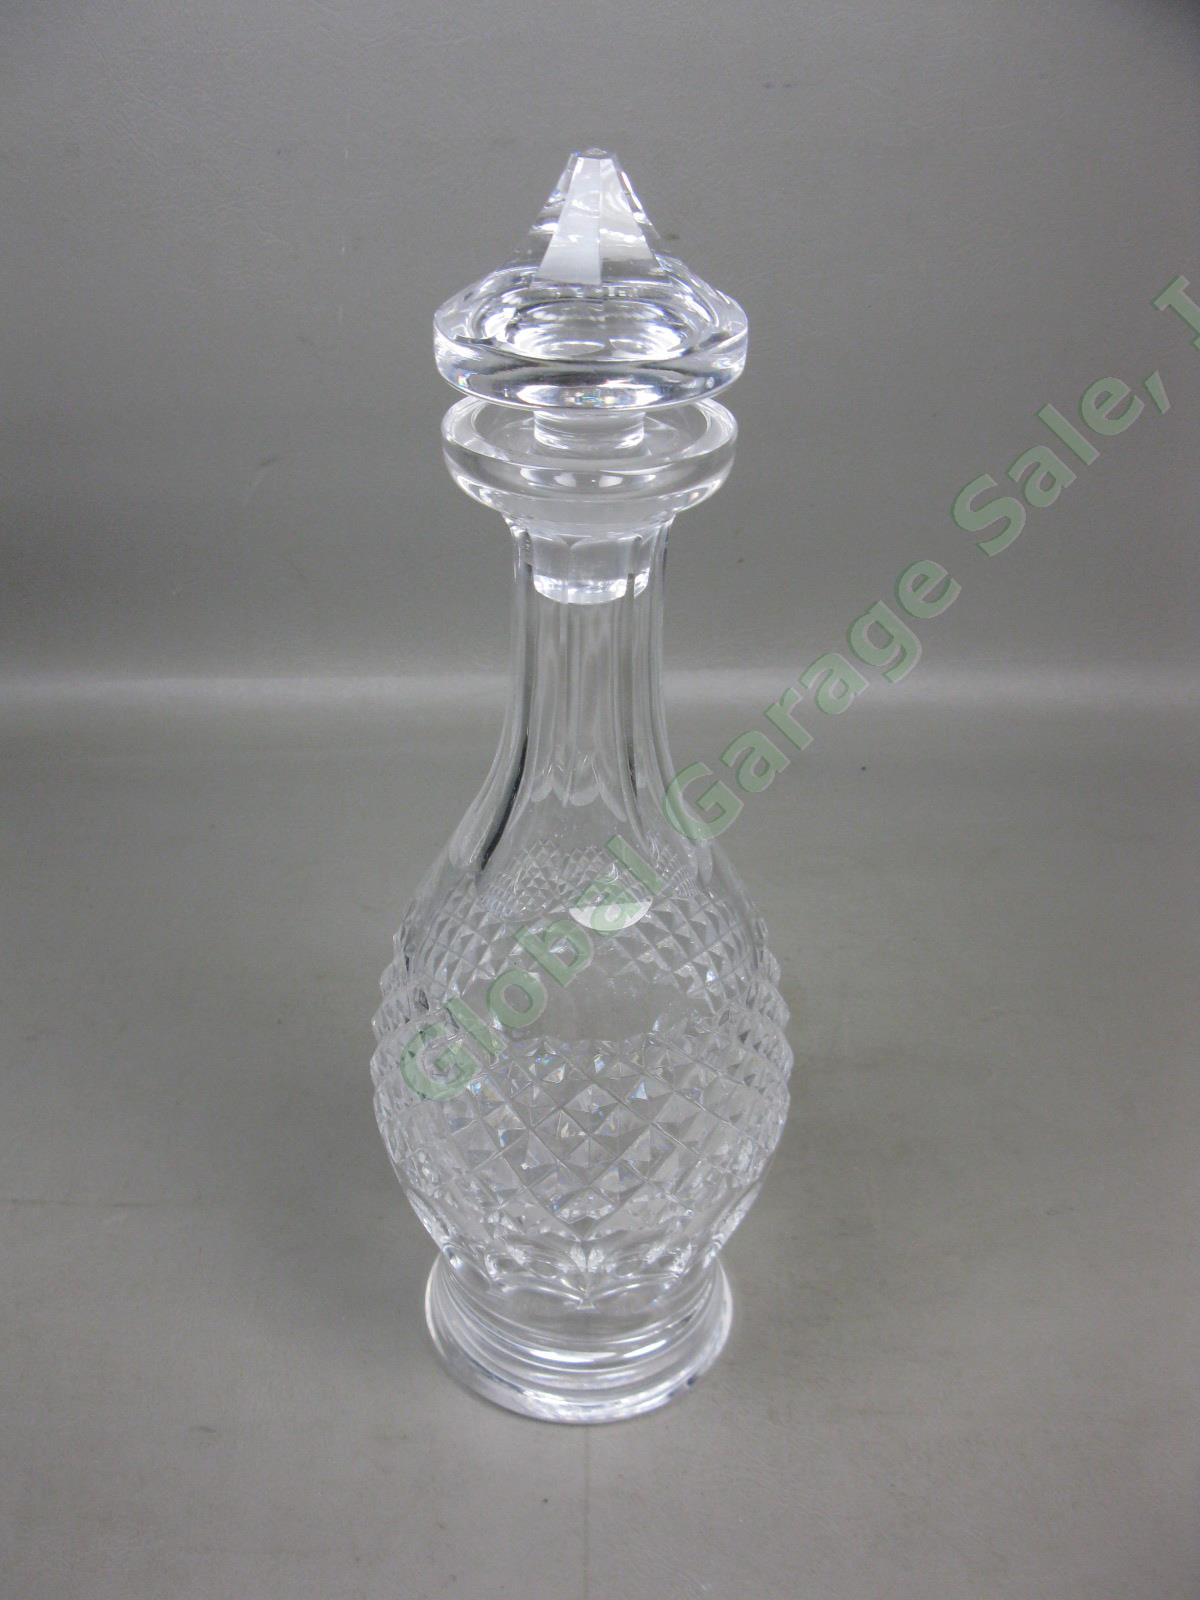 Waterford Cut Crystal Colleen Brandy Liquor Spirit Wine Decanter +Stopper Signed